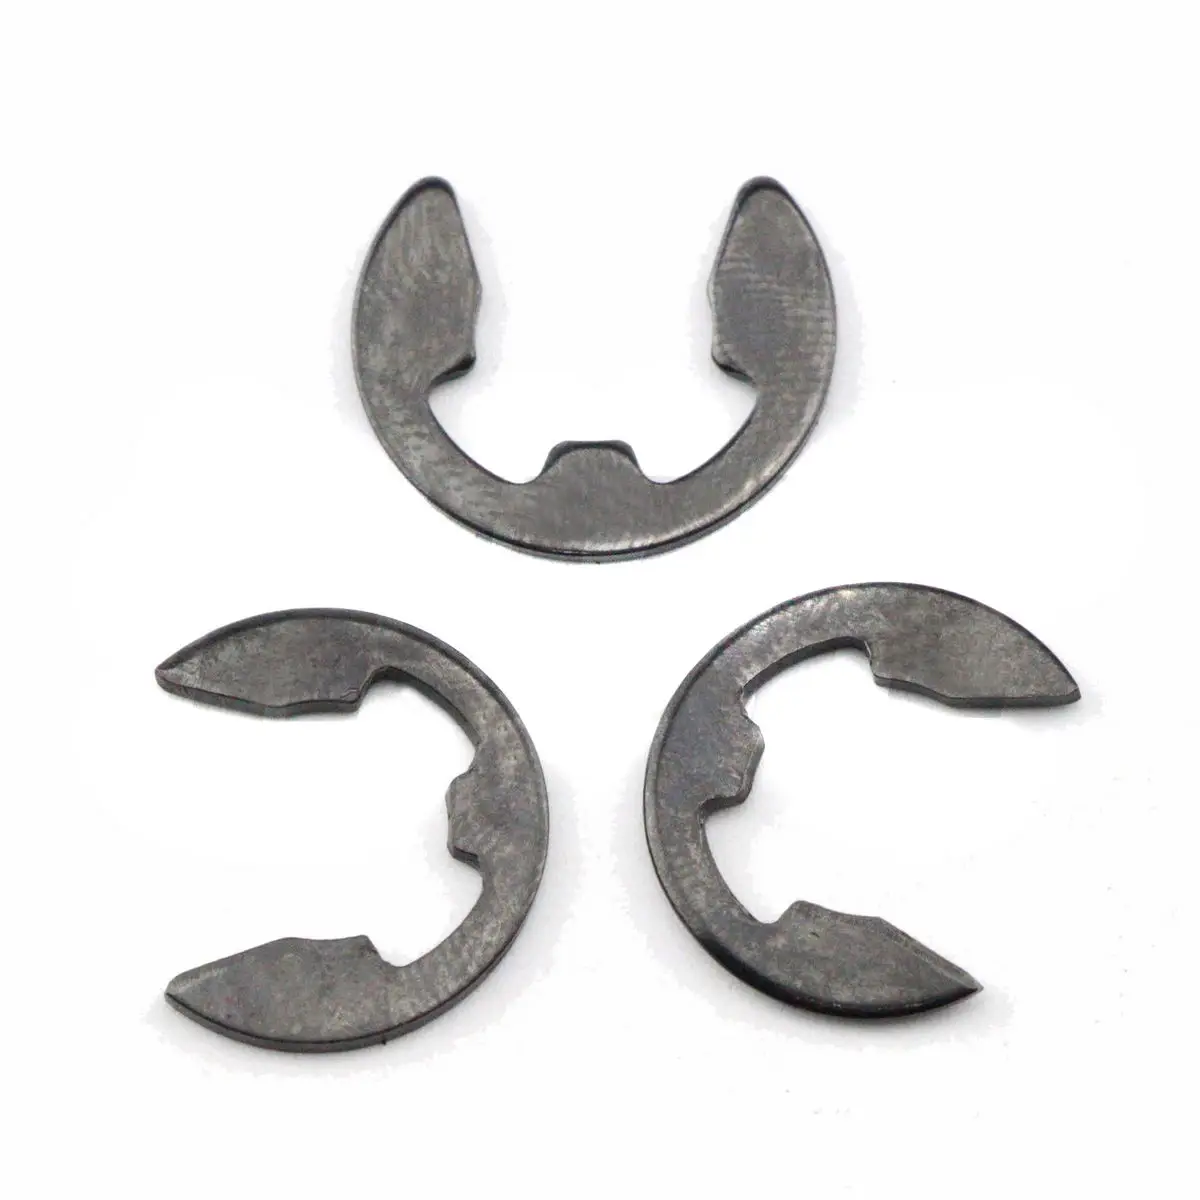 50pcs x E-clip Snap Ring for MS170 MS180 MS250 MS260 MS361 MS440 MS460 MS660 8mm  Accessories